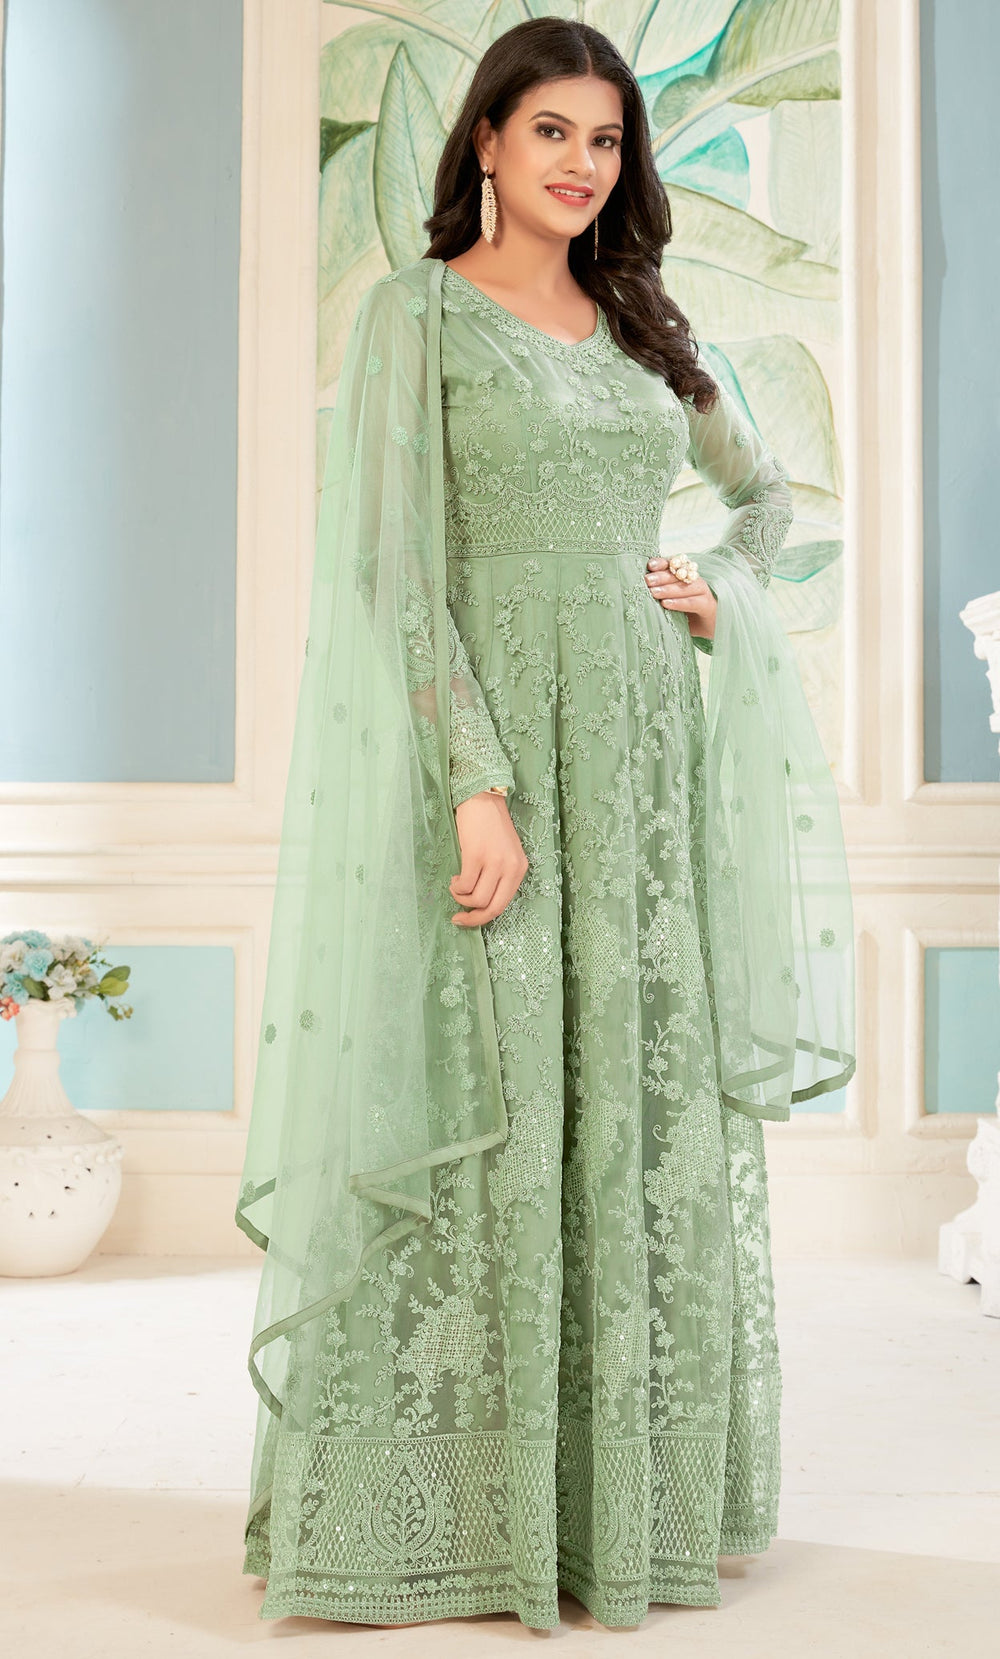 Enchanting Green Gown with Butterfly Net & Luxurious Japan-Satin for Parties & Weddings